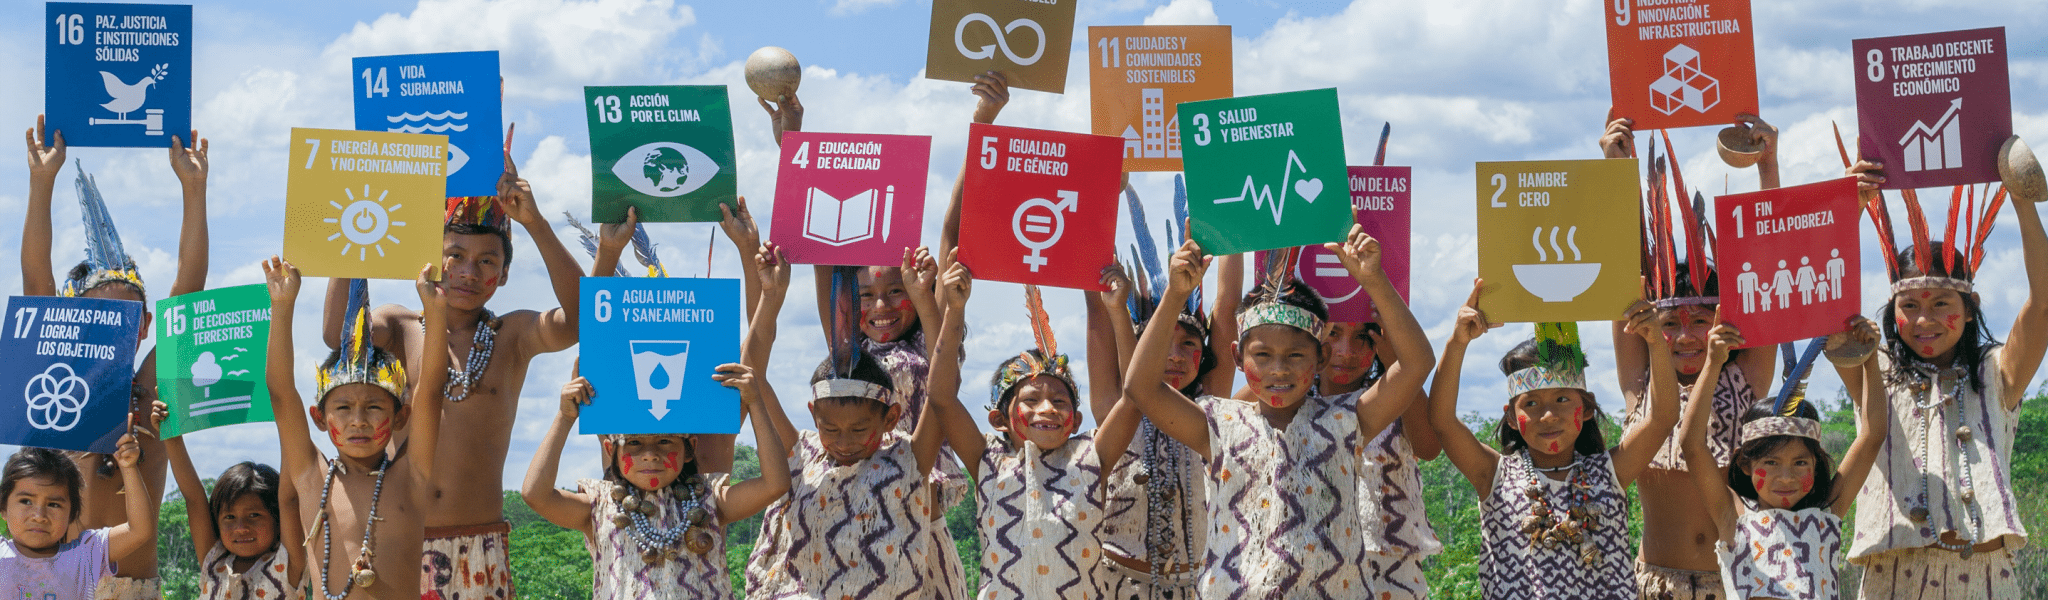 A group of children holding the logo of the Sustainable Development Goals